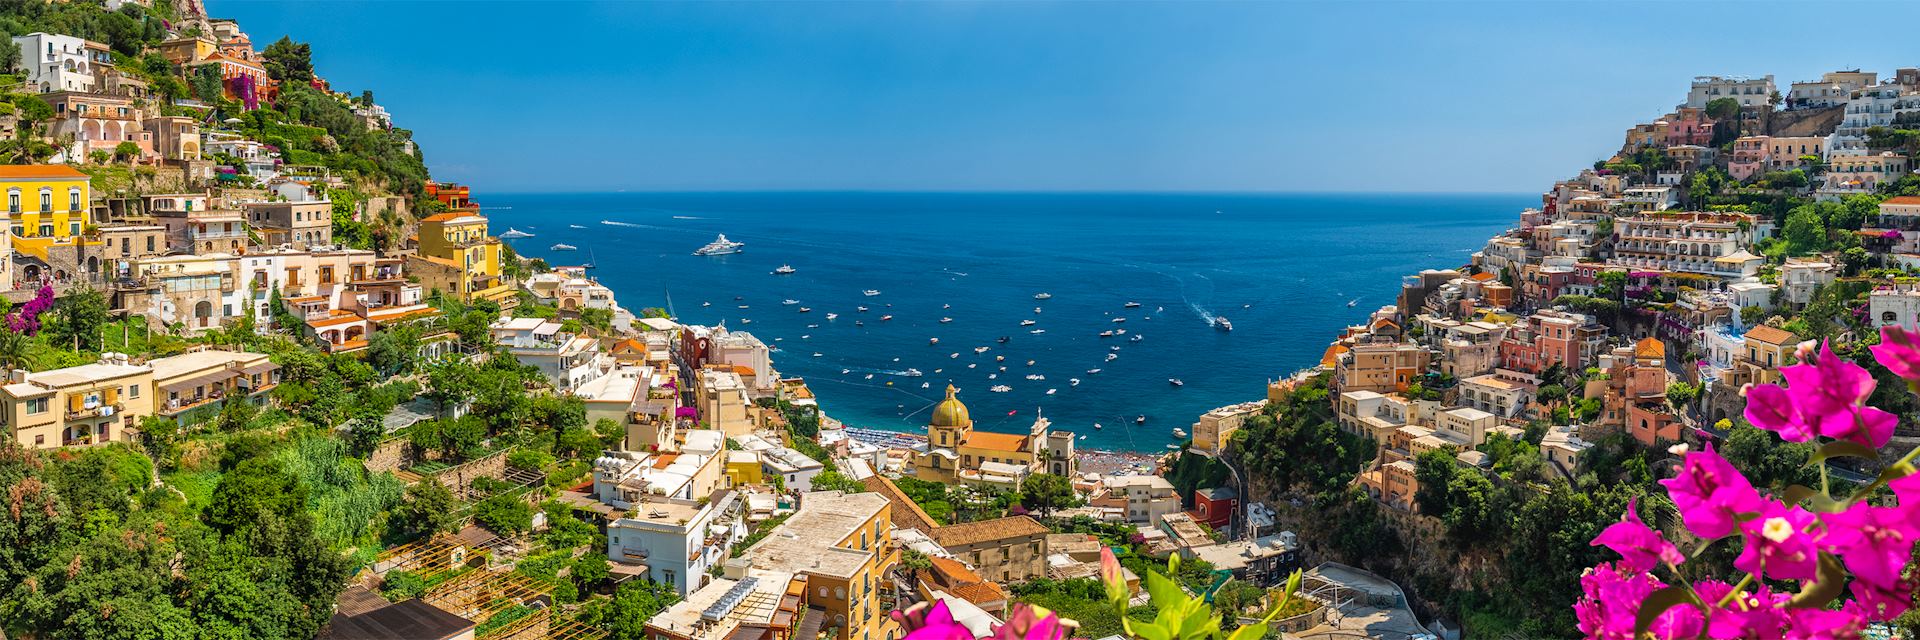 Guide to exploring the Amalfi Coast and Capri Audley Travel